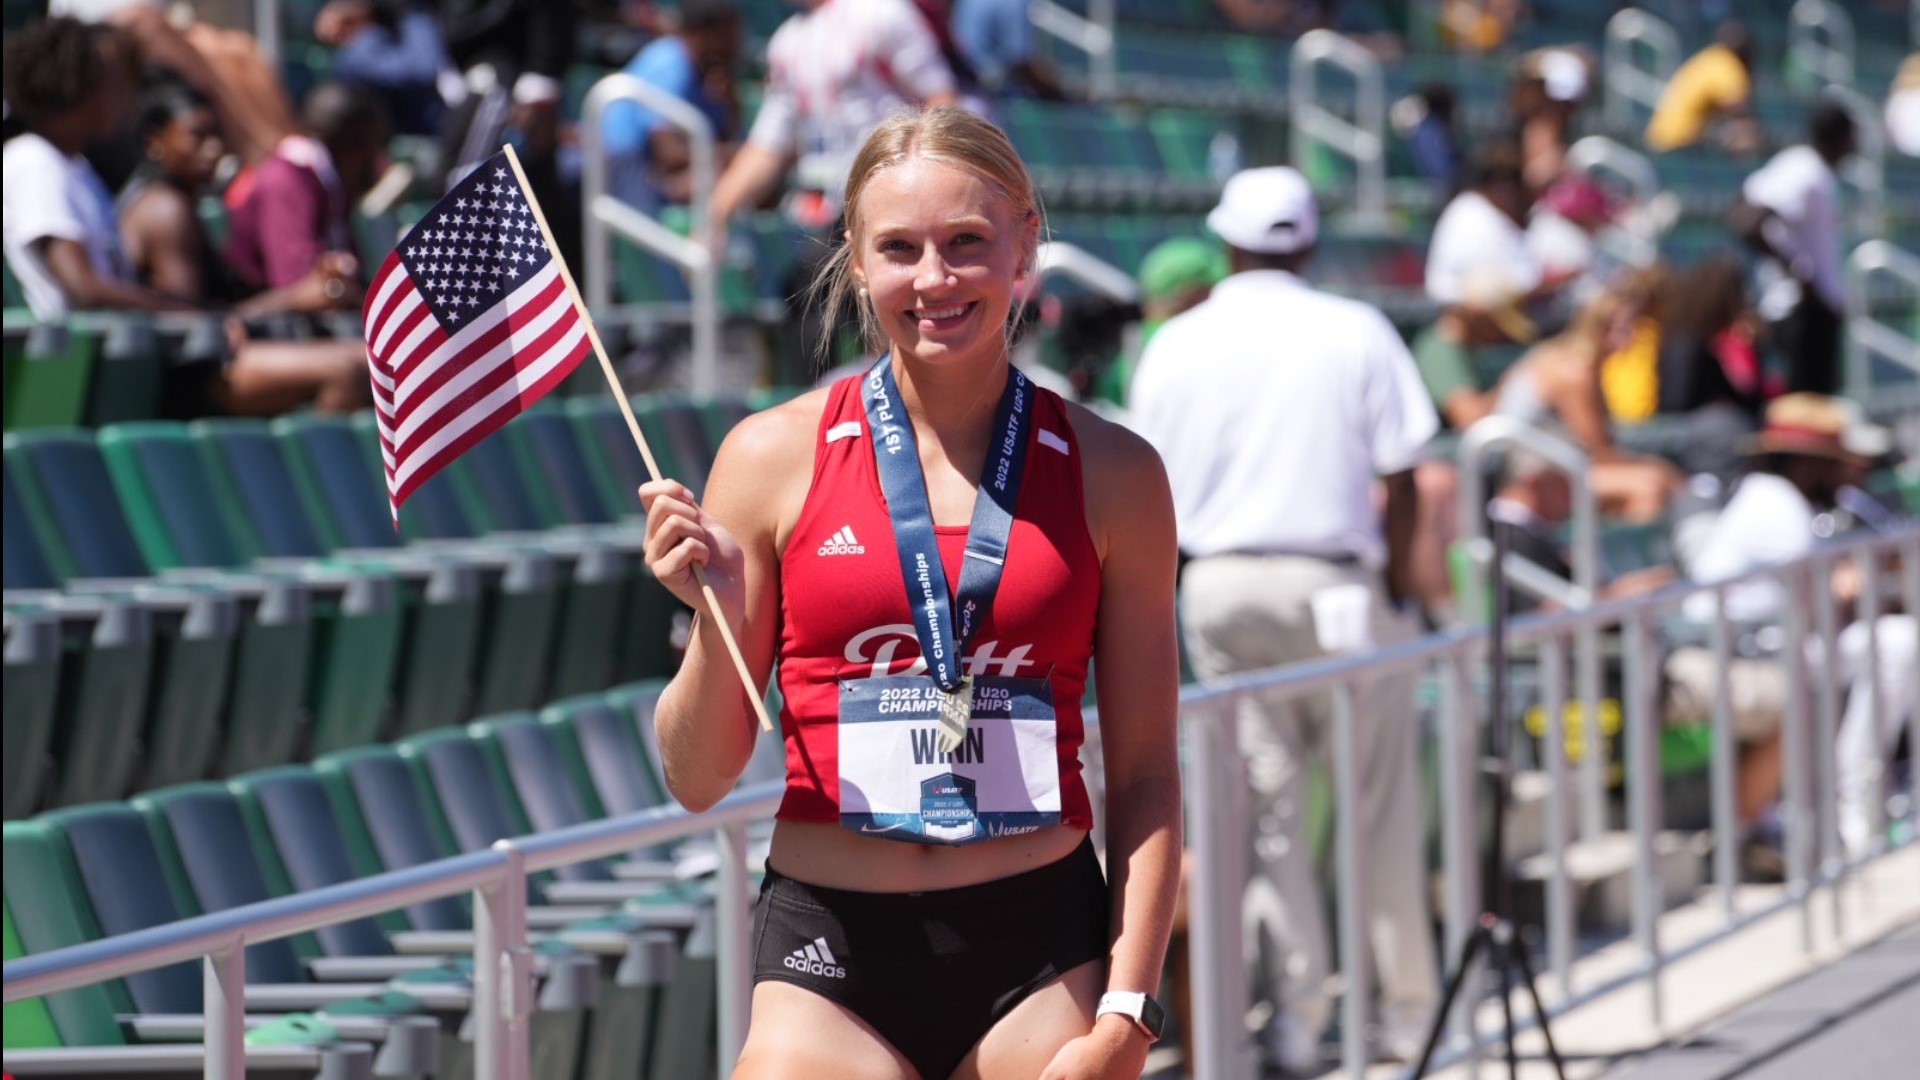 Winn capped her freshman year at Pitt State by winning the gold medal at the USATF under-20 championships in Eugene, Oregon in late June.